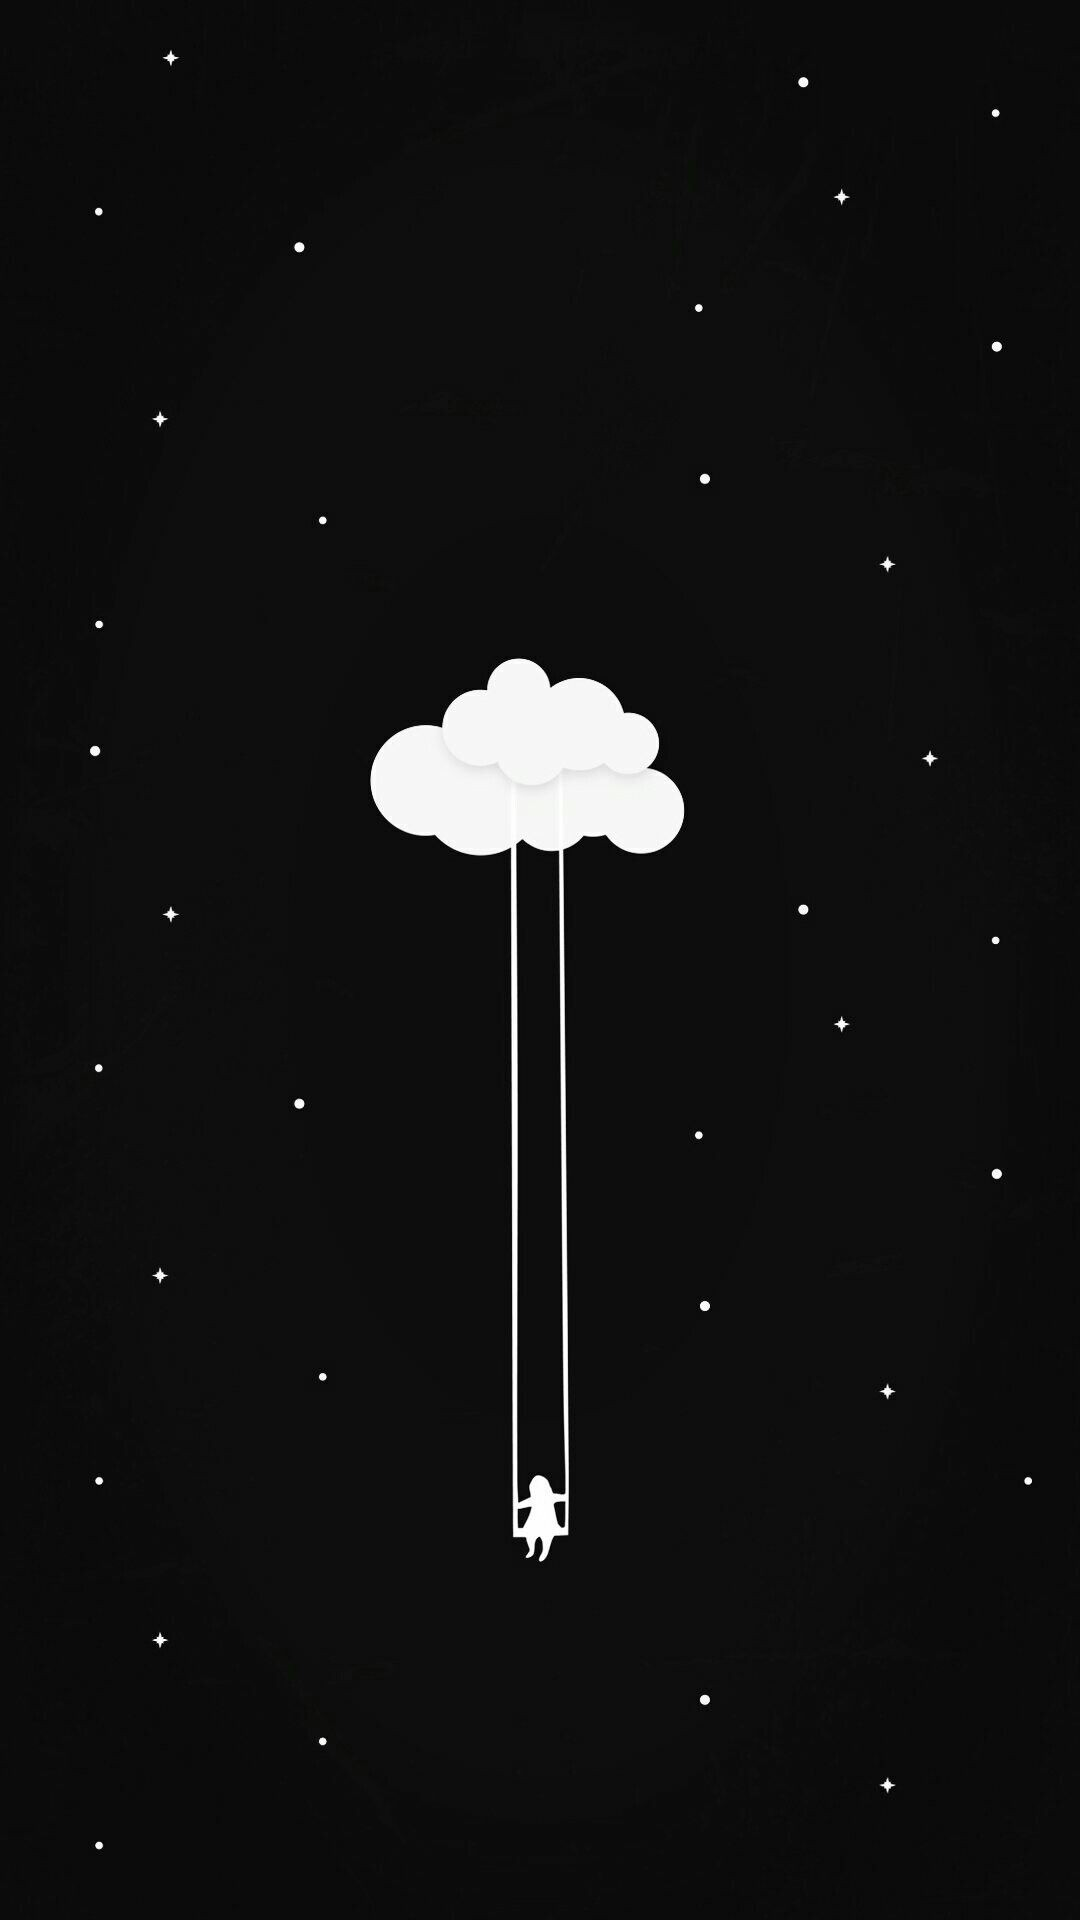 Awesome Cute Black Wallpaper for iPhone HD. Cute black wallpaper